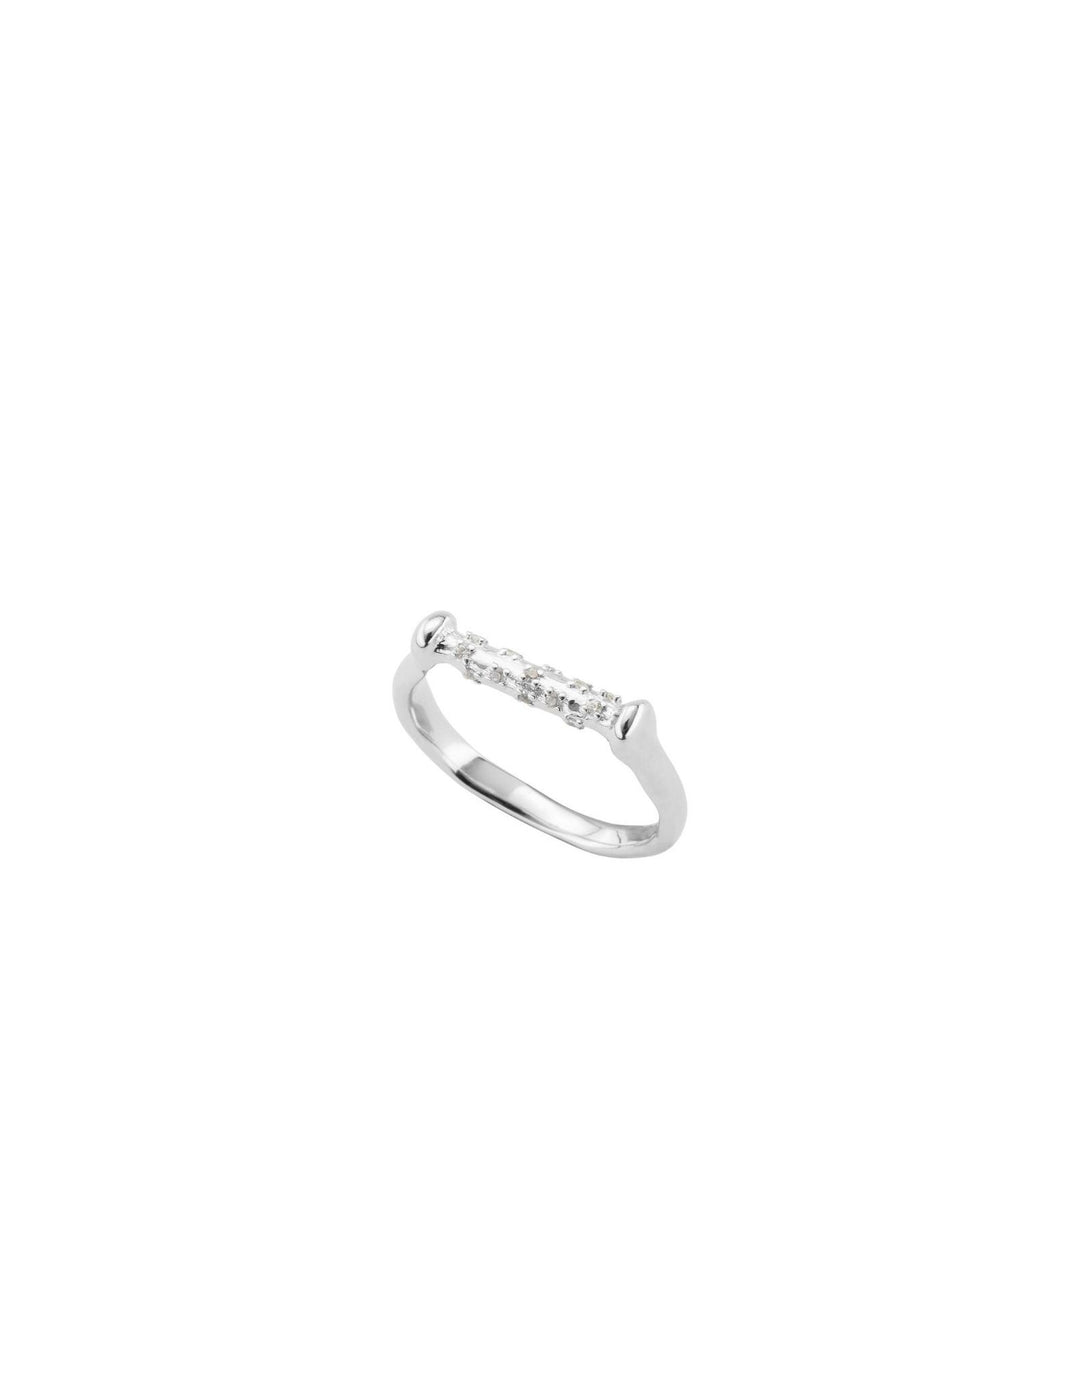 SILVER POSSESSION RING-7